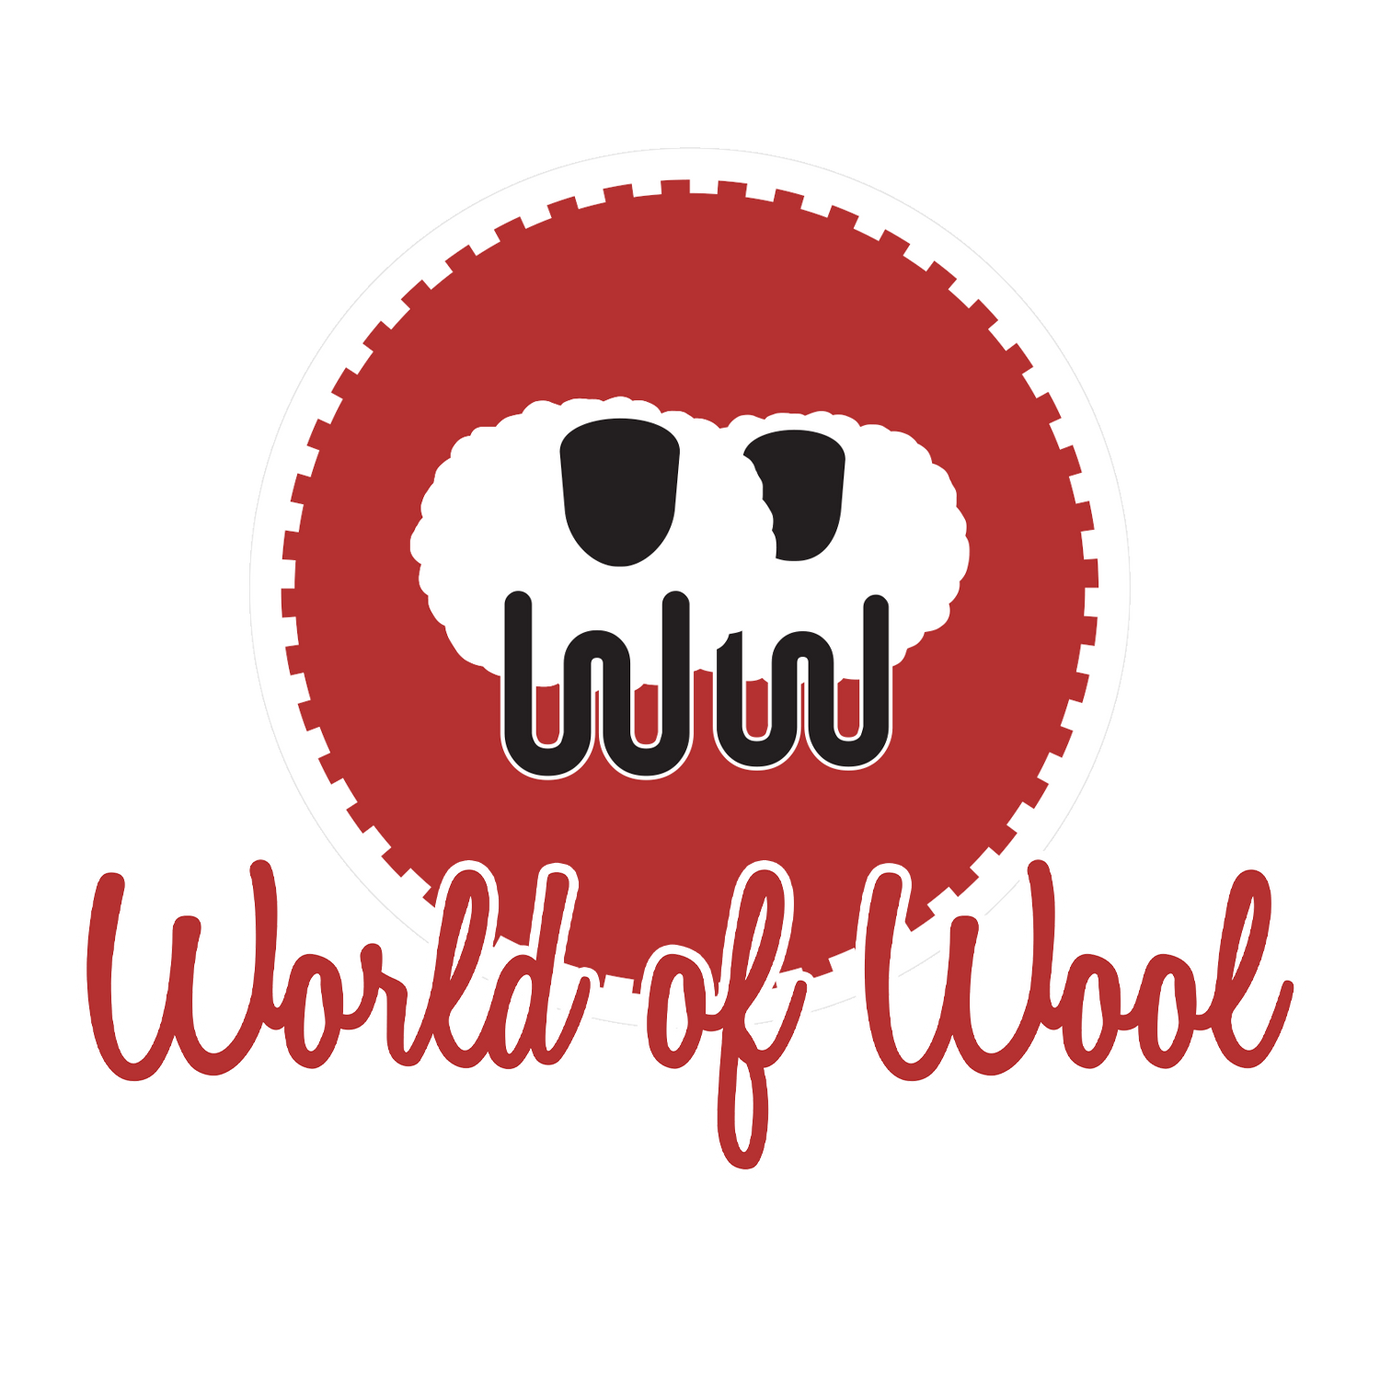 The 2023 World of Wool Website Relaunch